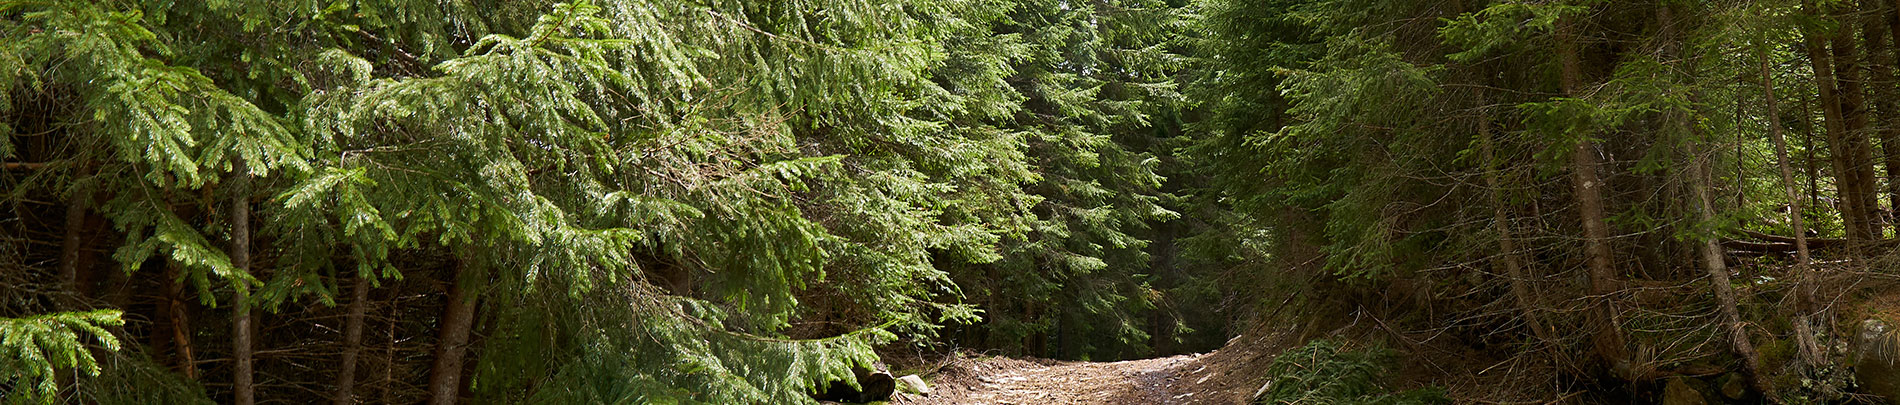 A rocky trail crests a small hill with trees on either side.